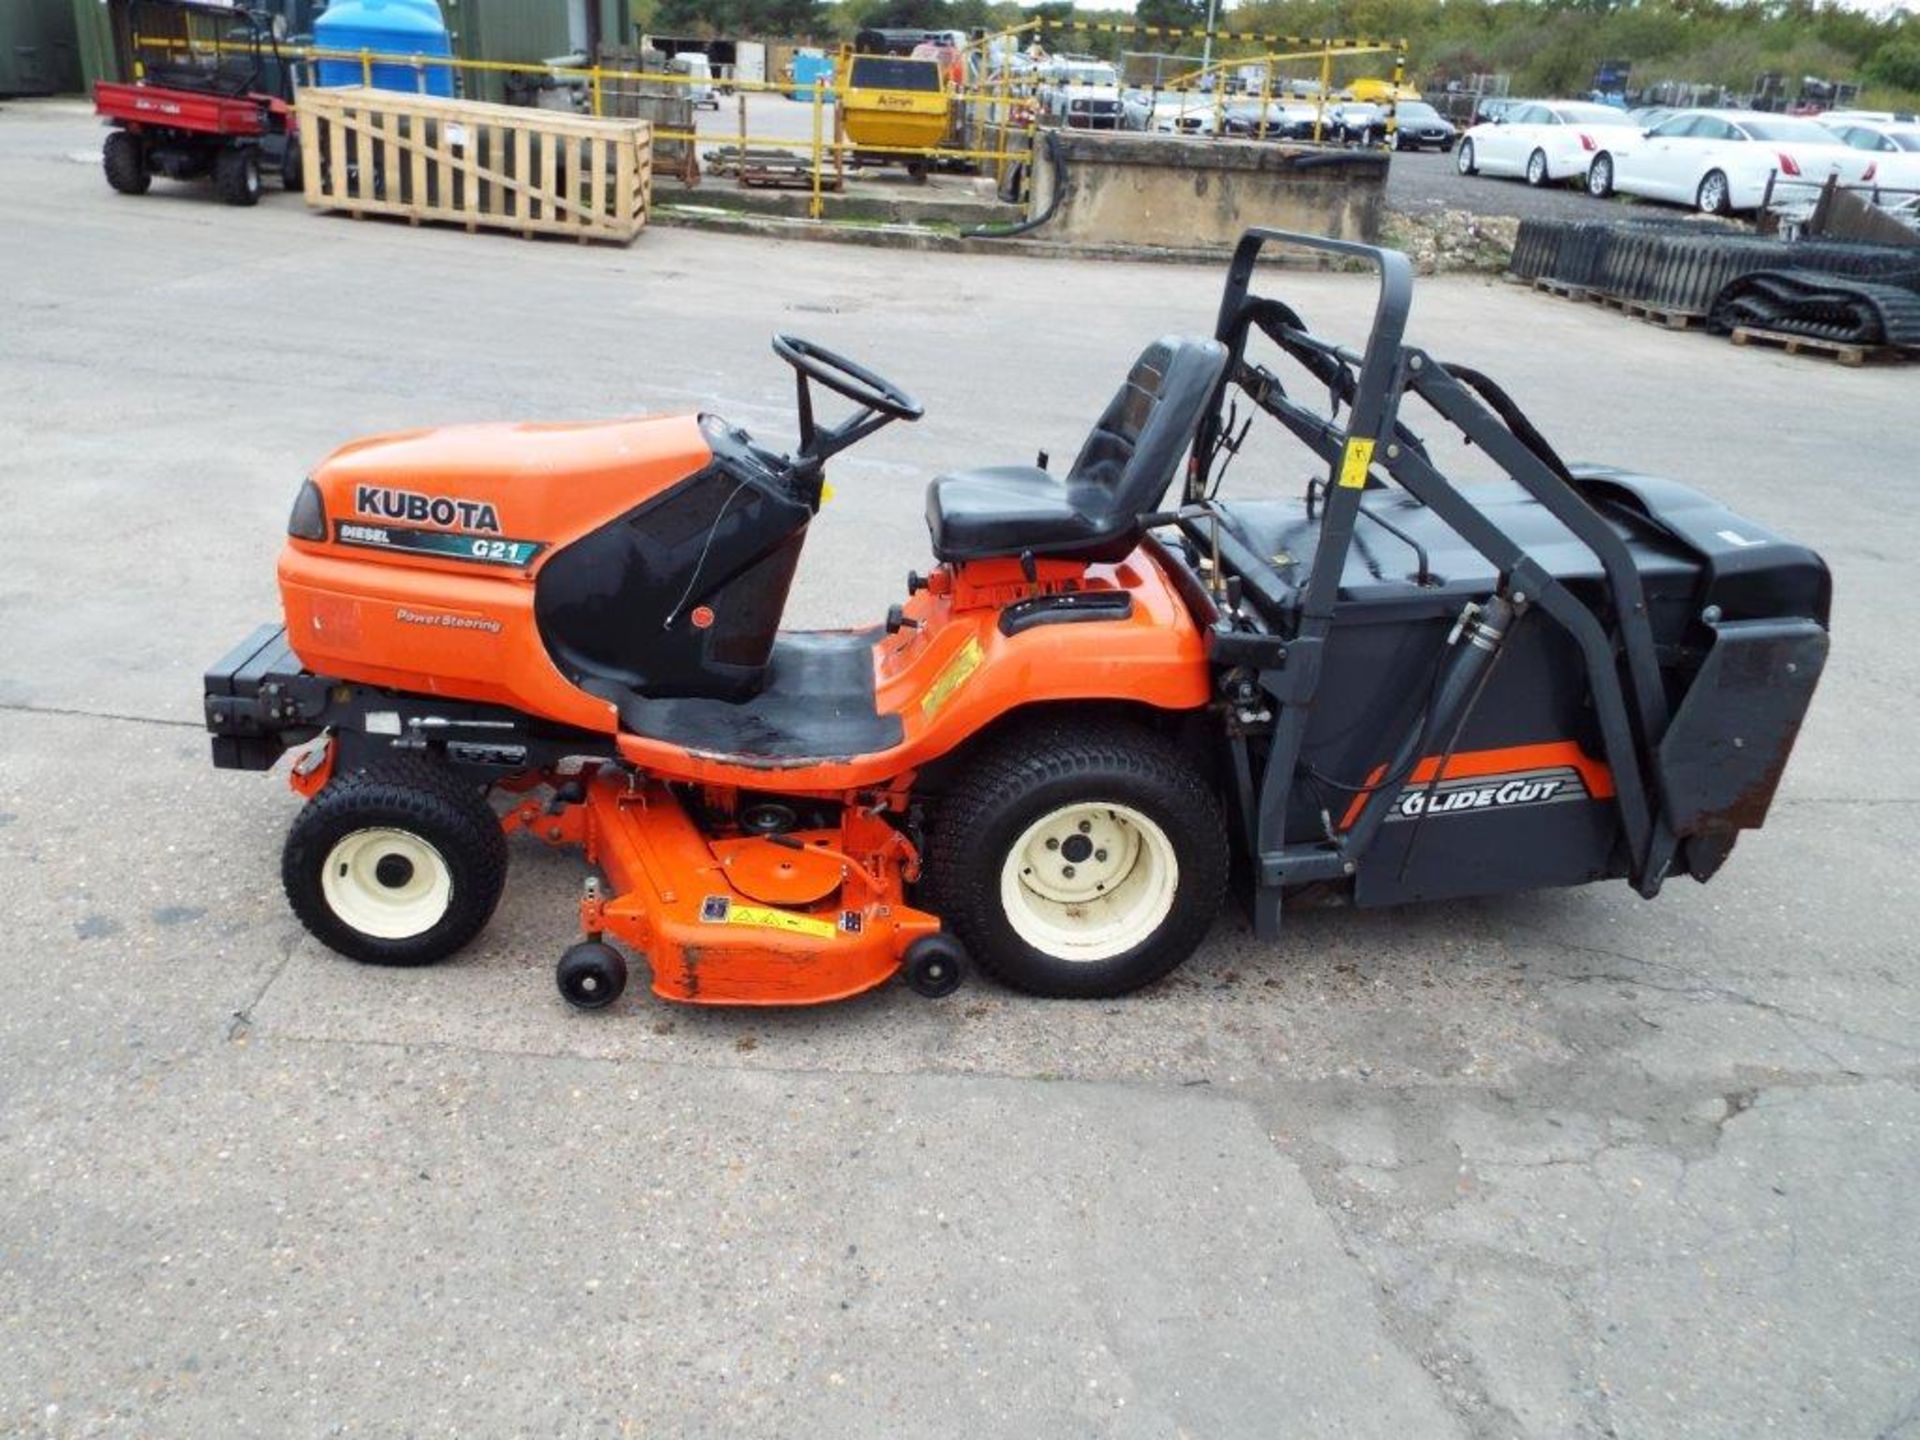 2008 Kubota G21 Ride On Mower with Glide-Cut System and High Dump Grass Collector - Image 4 of 26